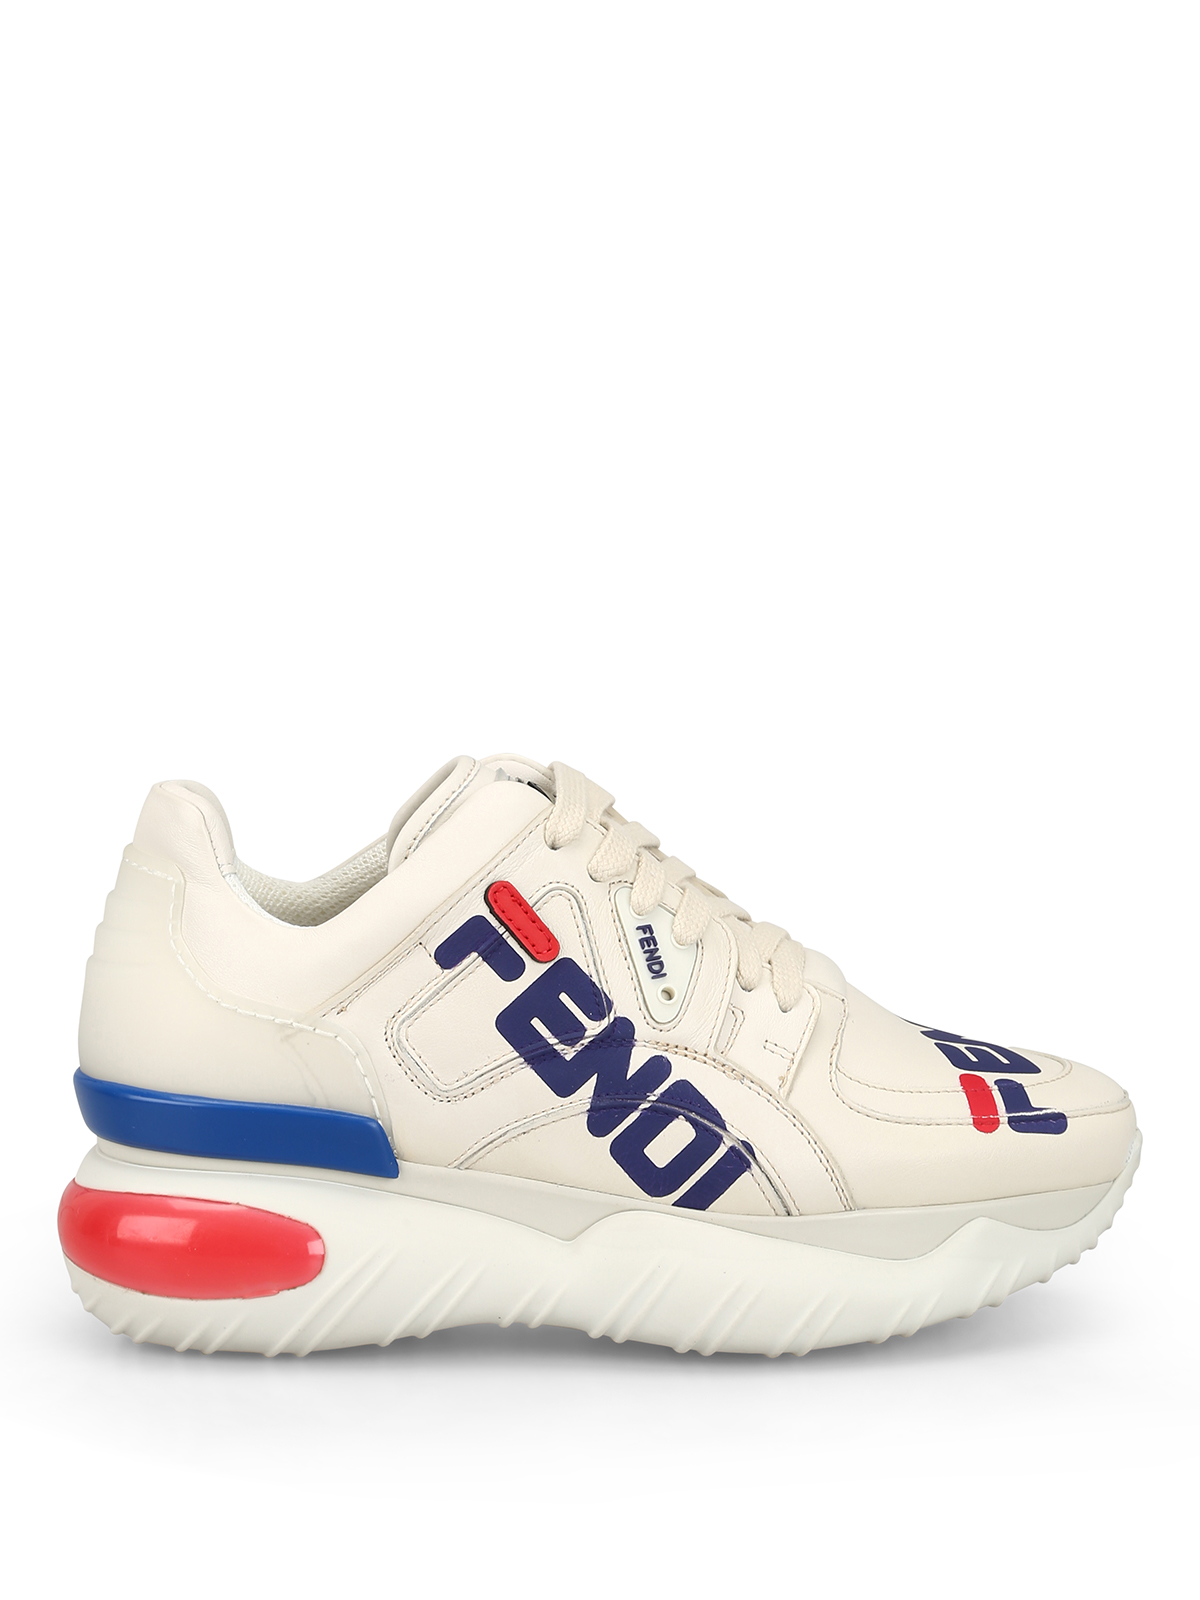 Fendi Mania leather lace up sneakers 